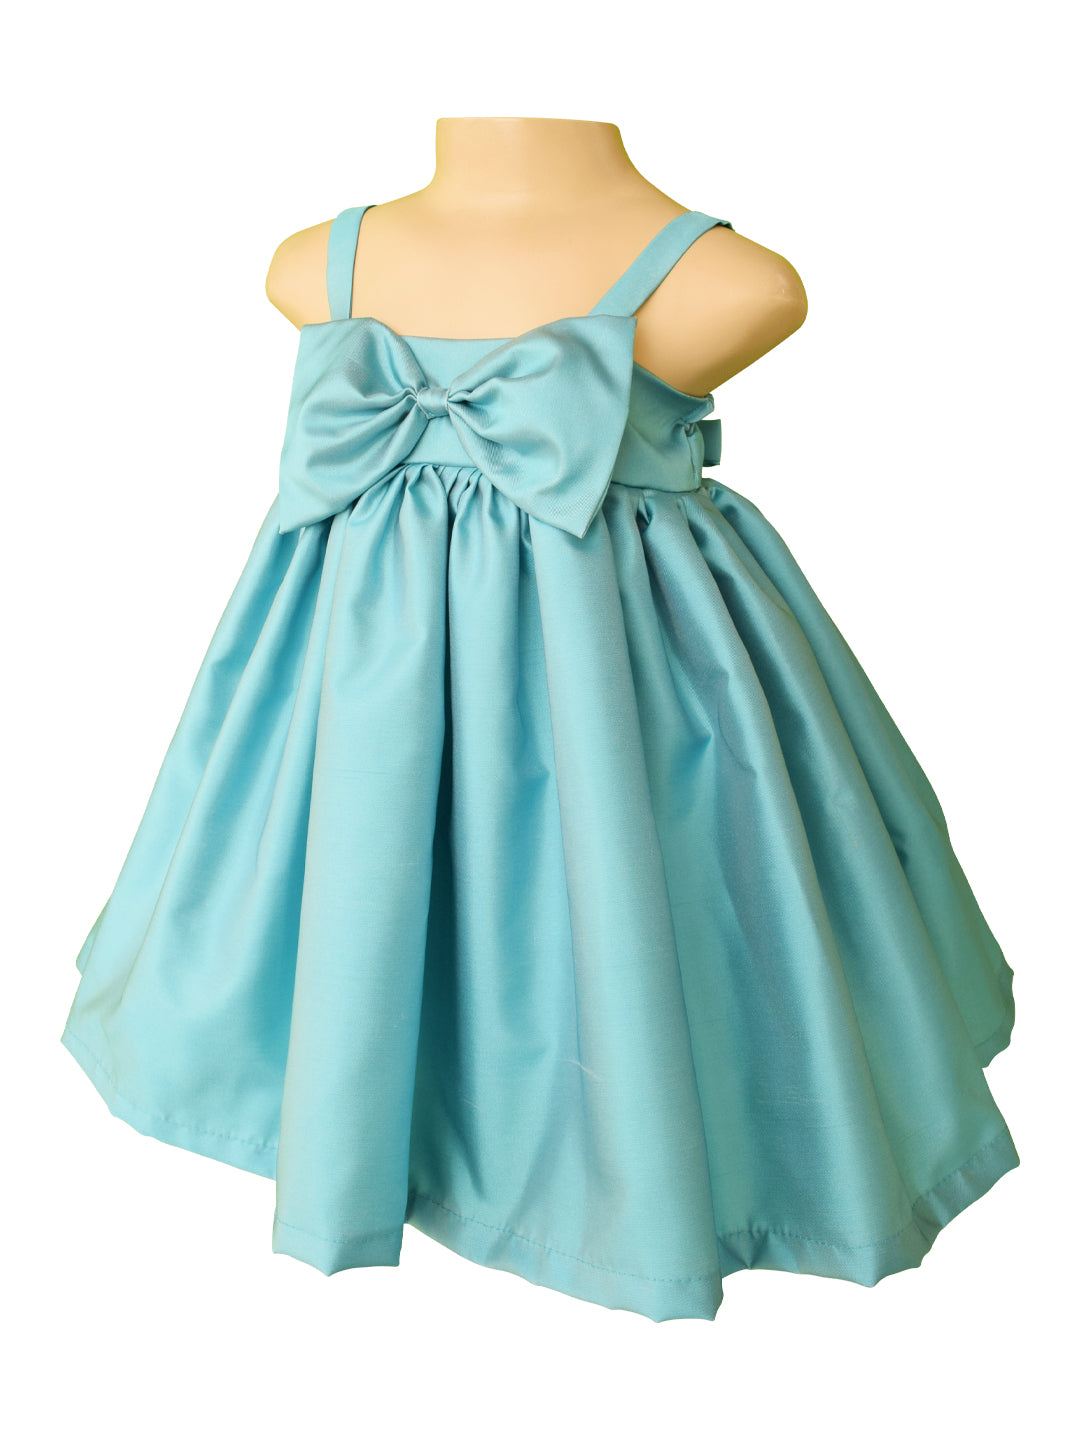 Buy Popees baby girl dresses | kids clothes online at Best Prices